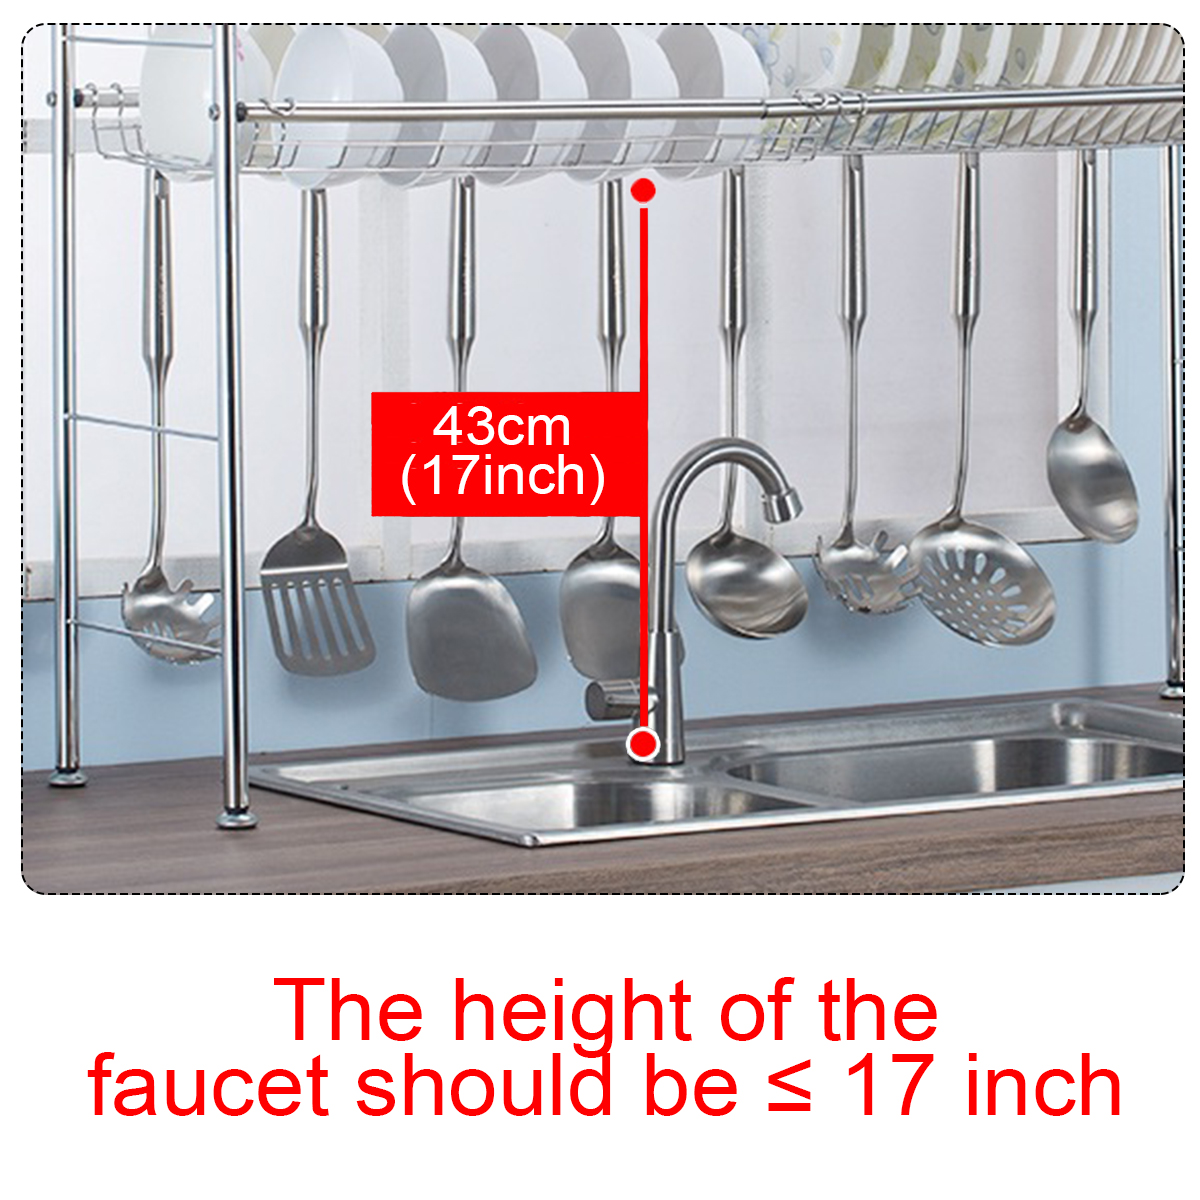 2-Tiers-Stainless-Steel-Dishes-Rack-Dual-Sink-Drain-Rack-Adjustable-Multi-use-Kitchen-Organizer-Rack-1661464-5